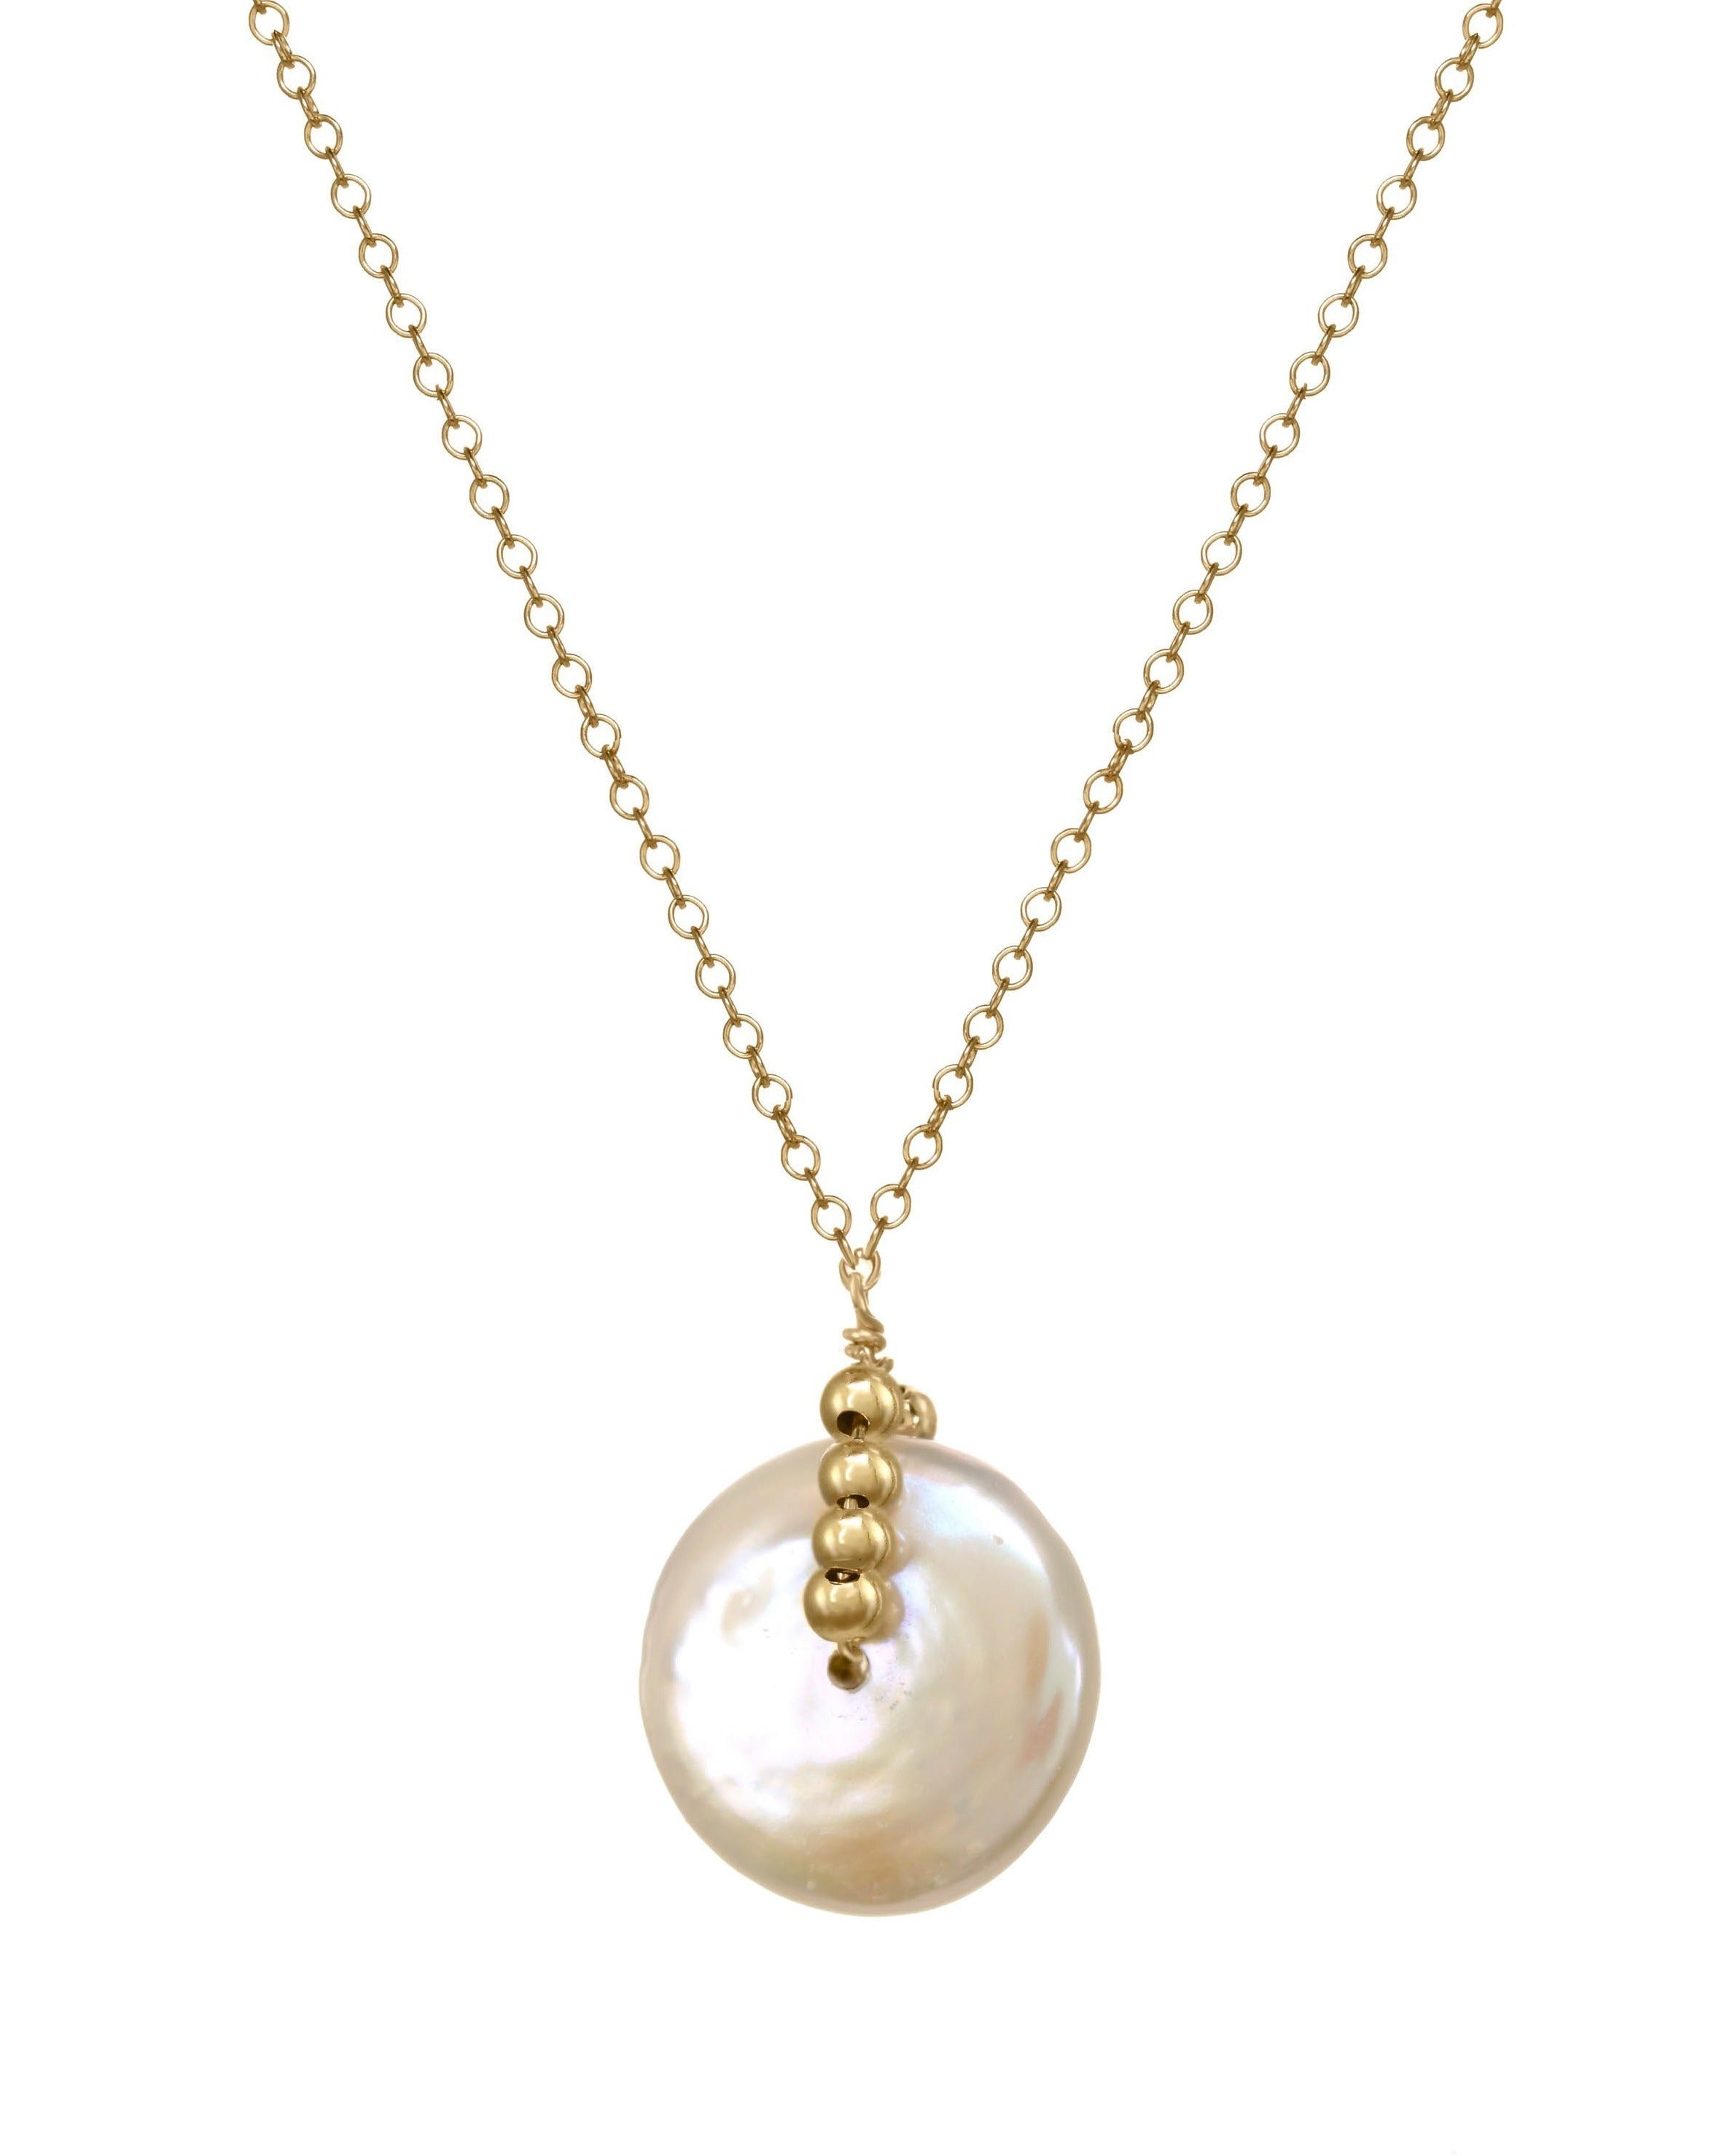 Violet Necklace by KOZAKH. A 16 to 18 inch adjustable length necklace, crafted in 14K Gold Filled, featuring a Keshi White pearl and 2mm seamless beads.